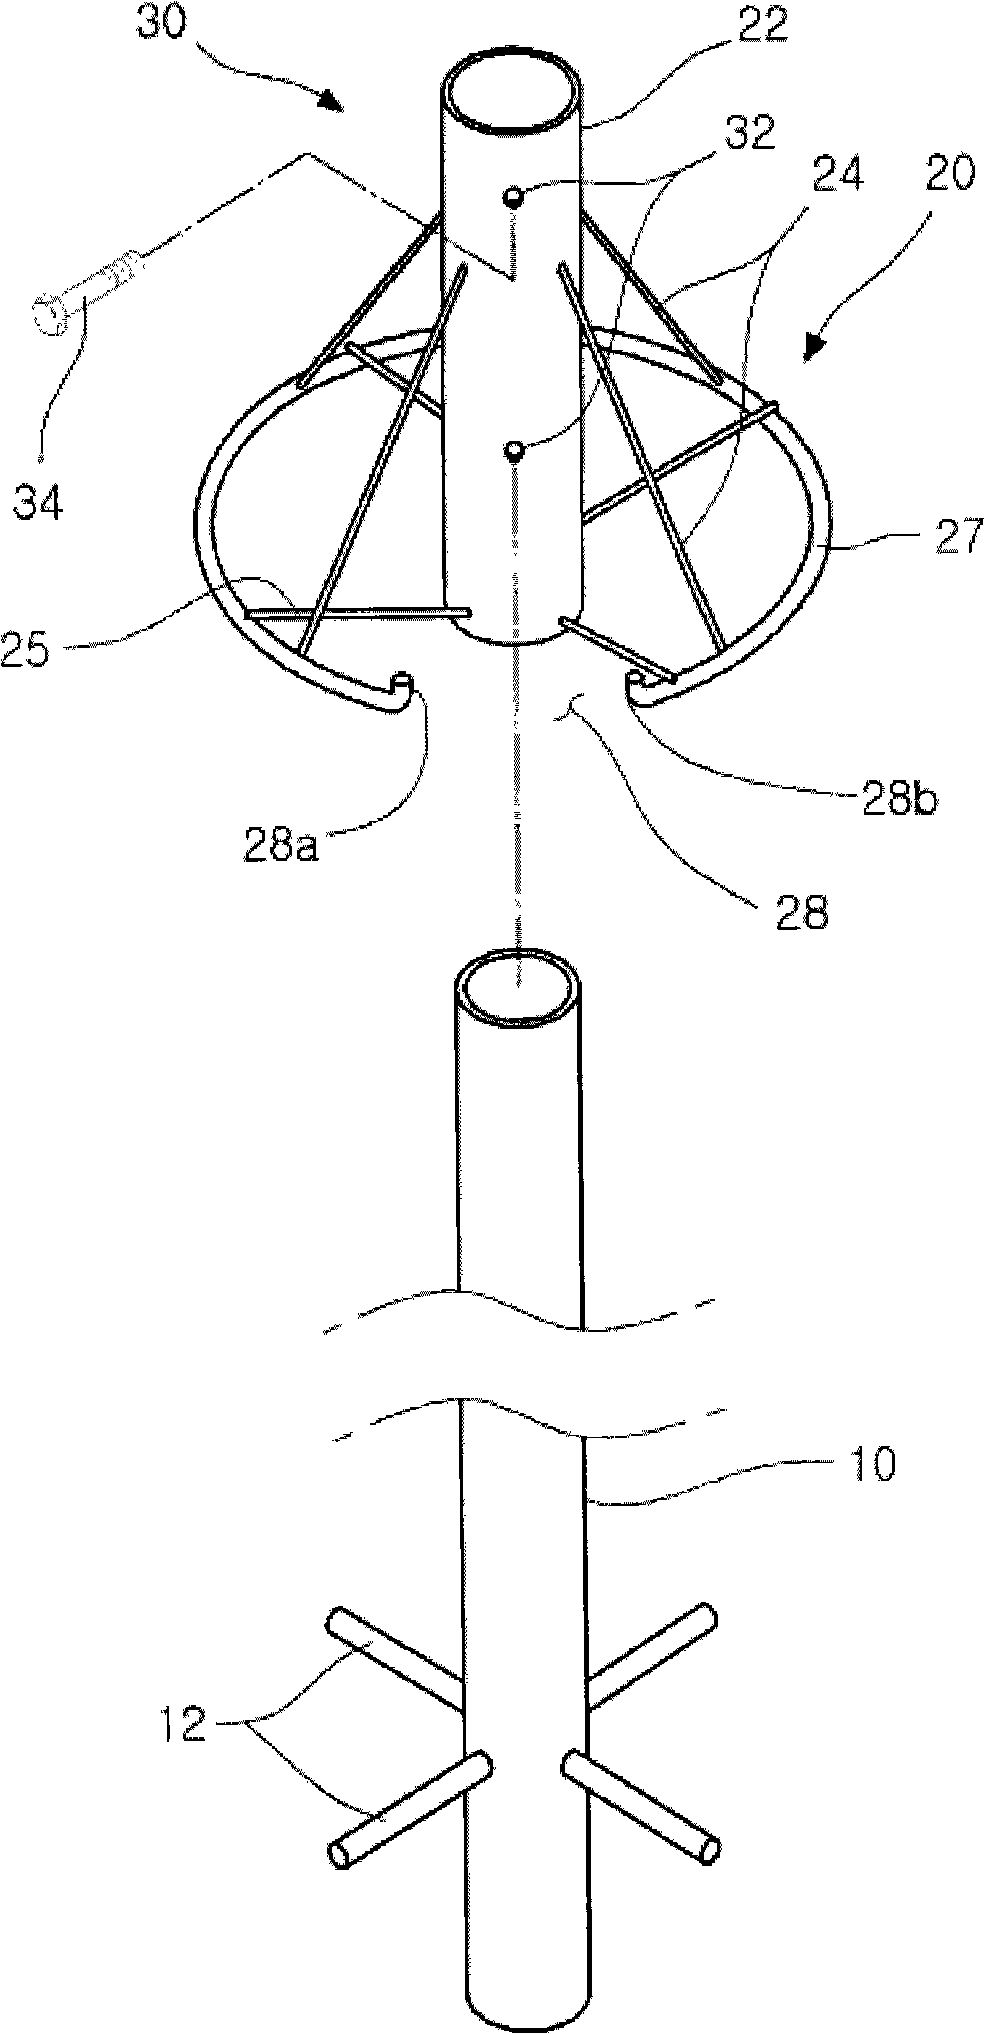 Tree branch supporting device